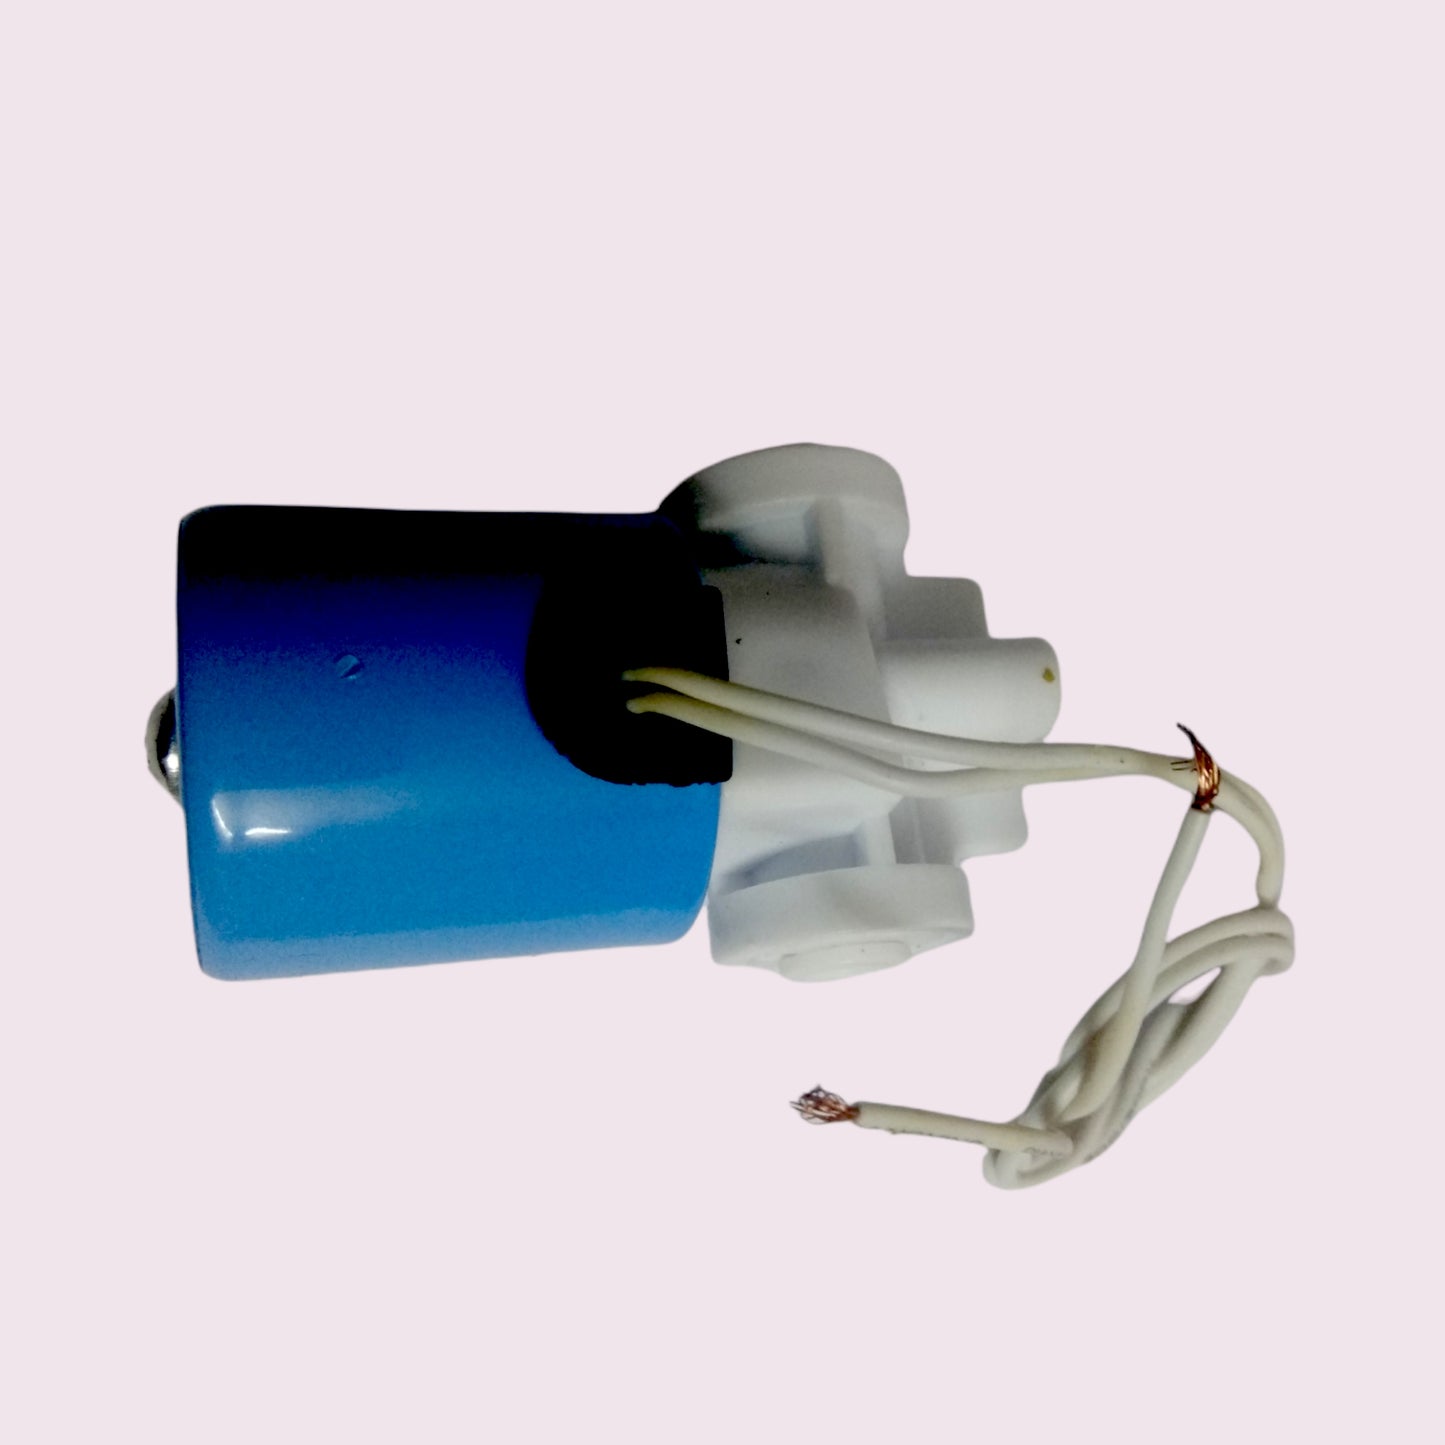 24 Volt DC Solenoid Valve suitable for Domestic RO System.